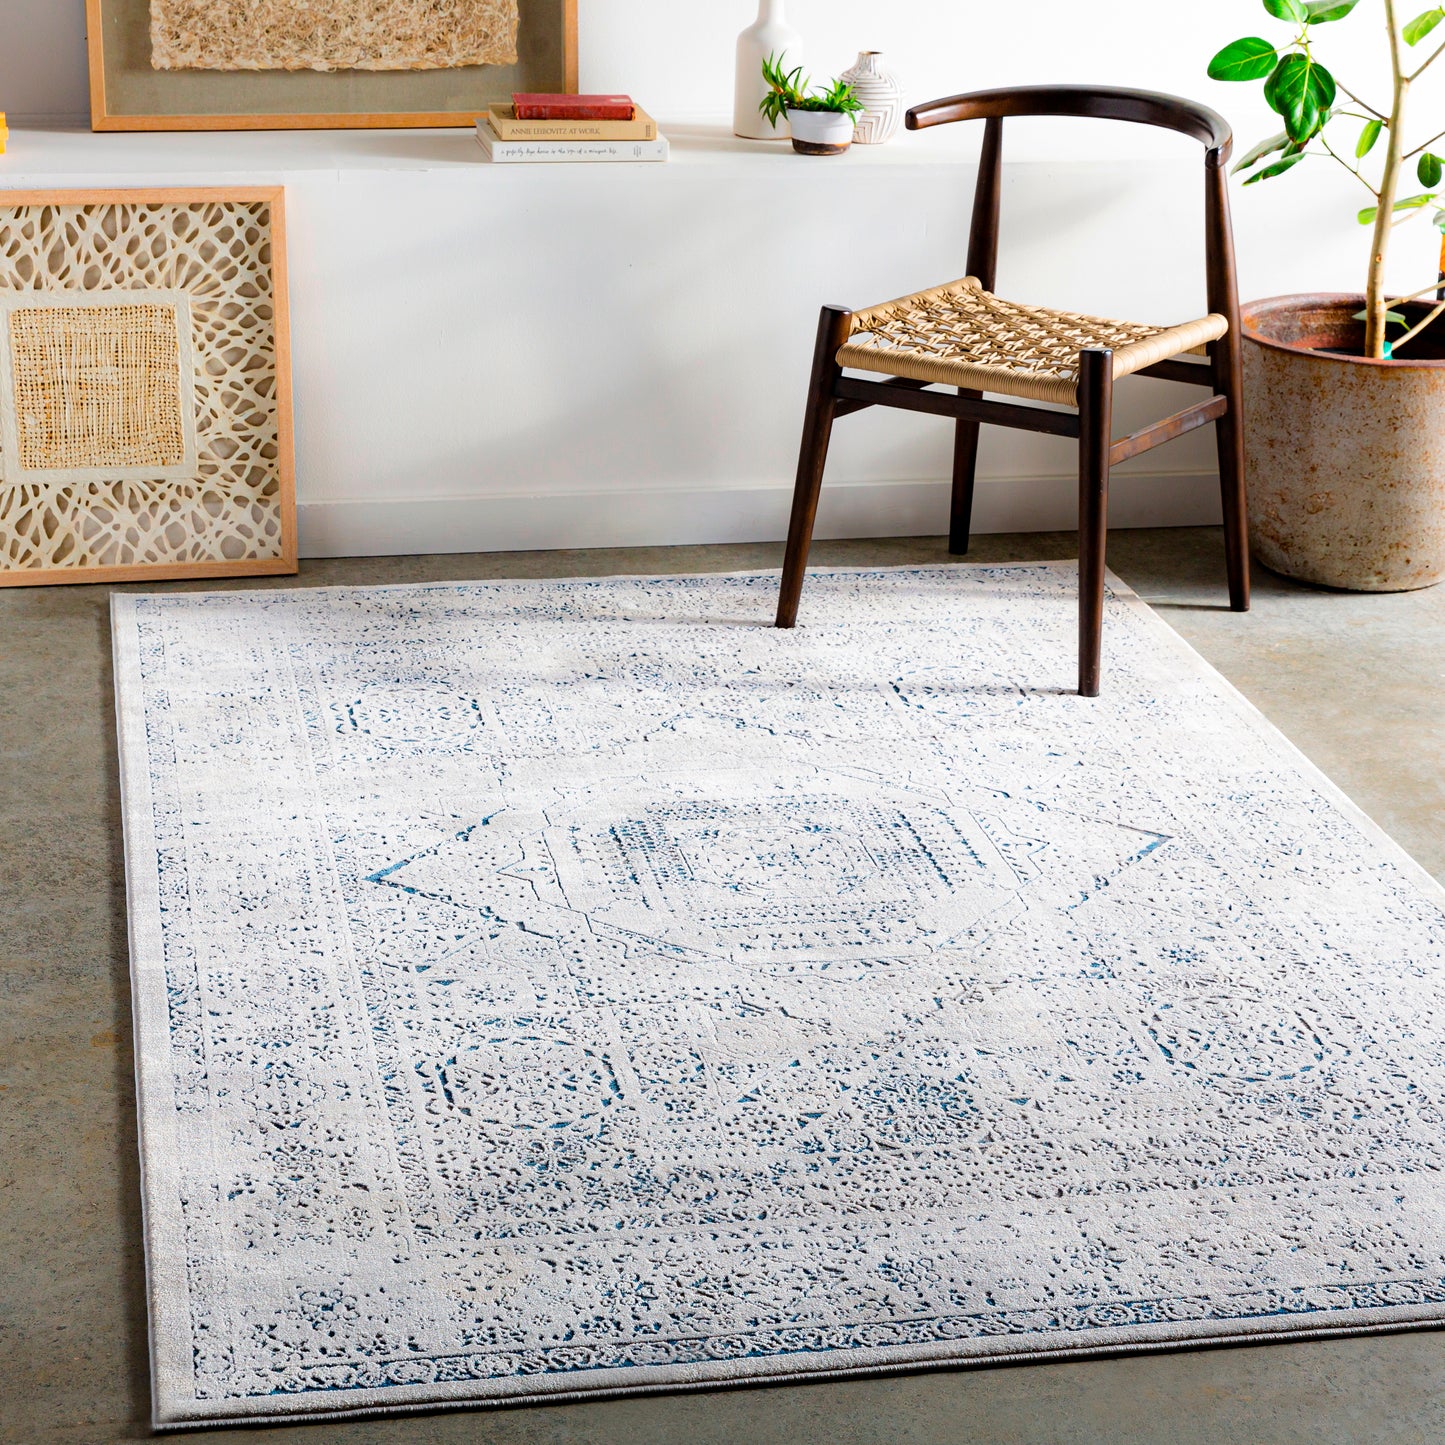 Aisha 26126 Machine Woven Synthetic Blend Indoor Area Rug by Surya Rugs